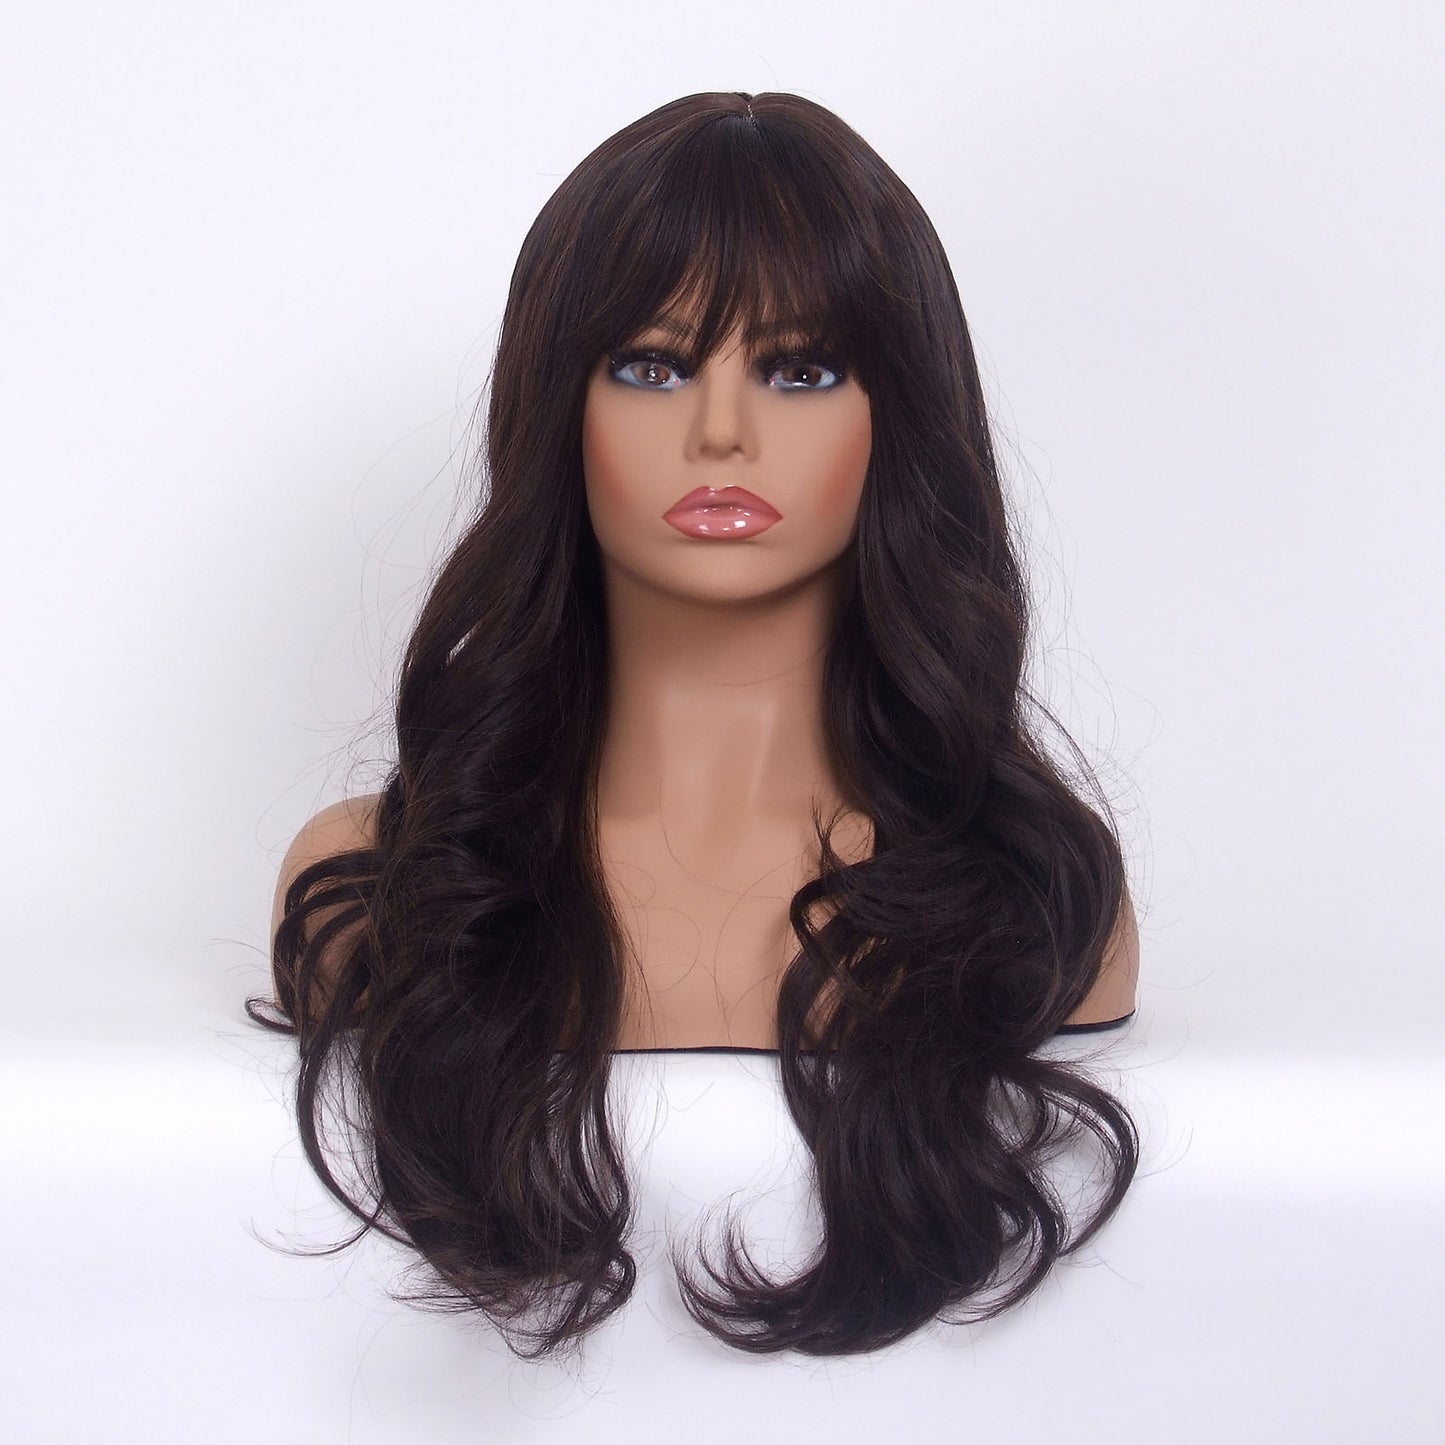 LINGDORA Long Curly Wavy Dark Brown Wig with Bangs for White Women Synthetic Hair